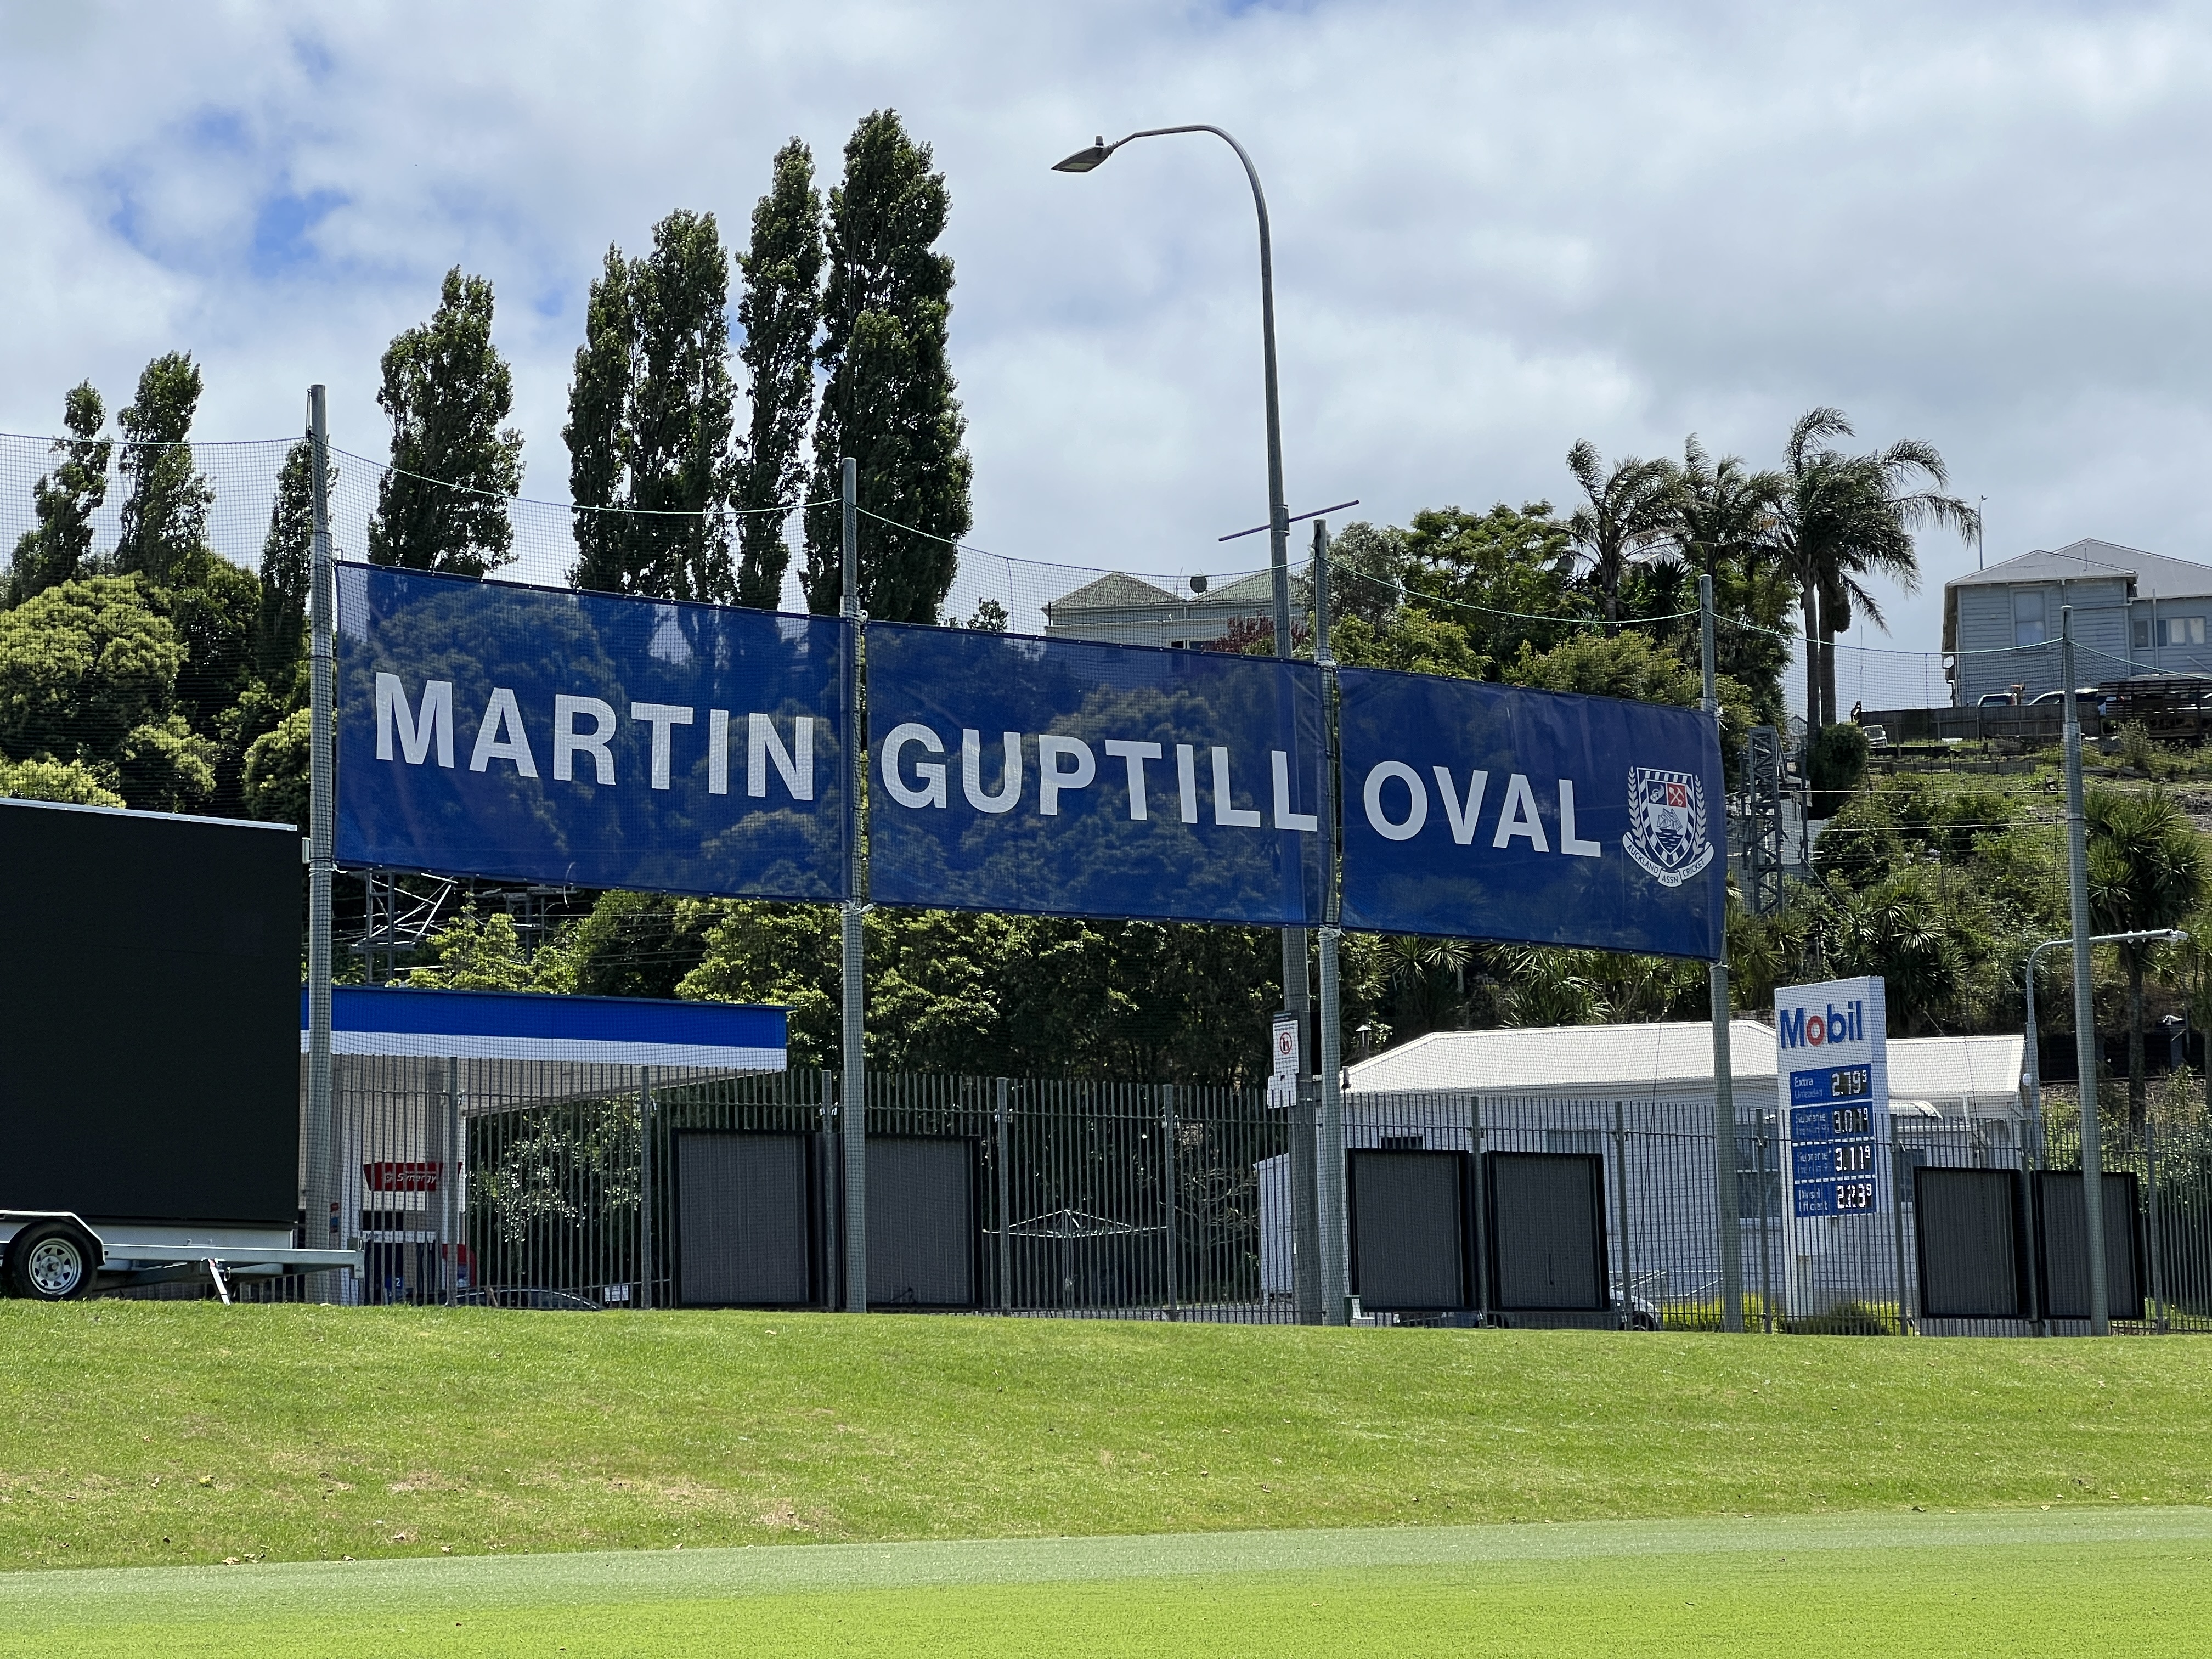 Super Smash | Twitter in awe as fans and family celebrate Martin Guptill in Auckland on 'Thank You Gup' Day